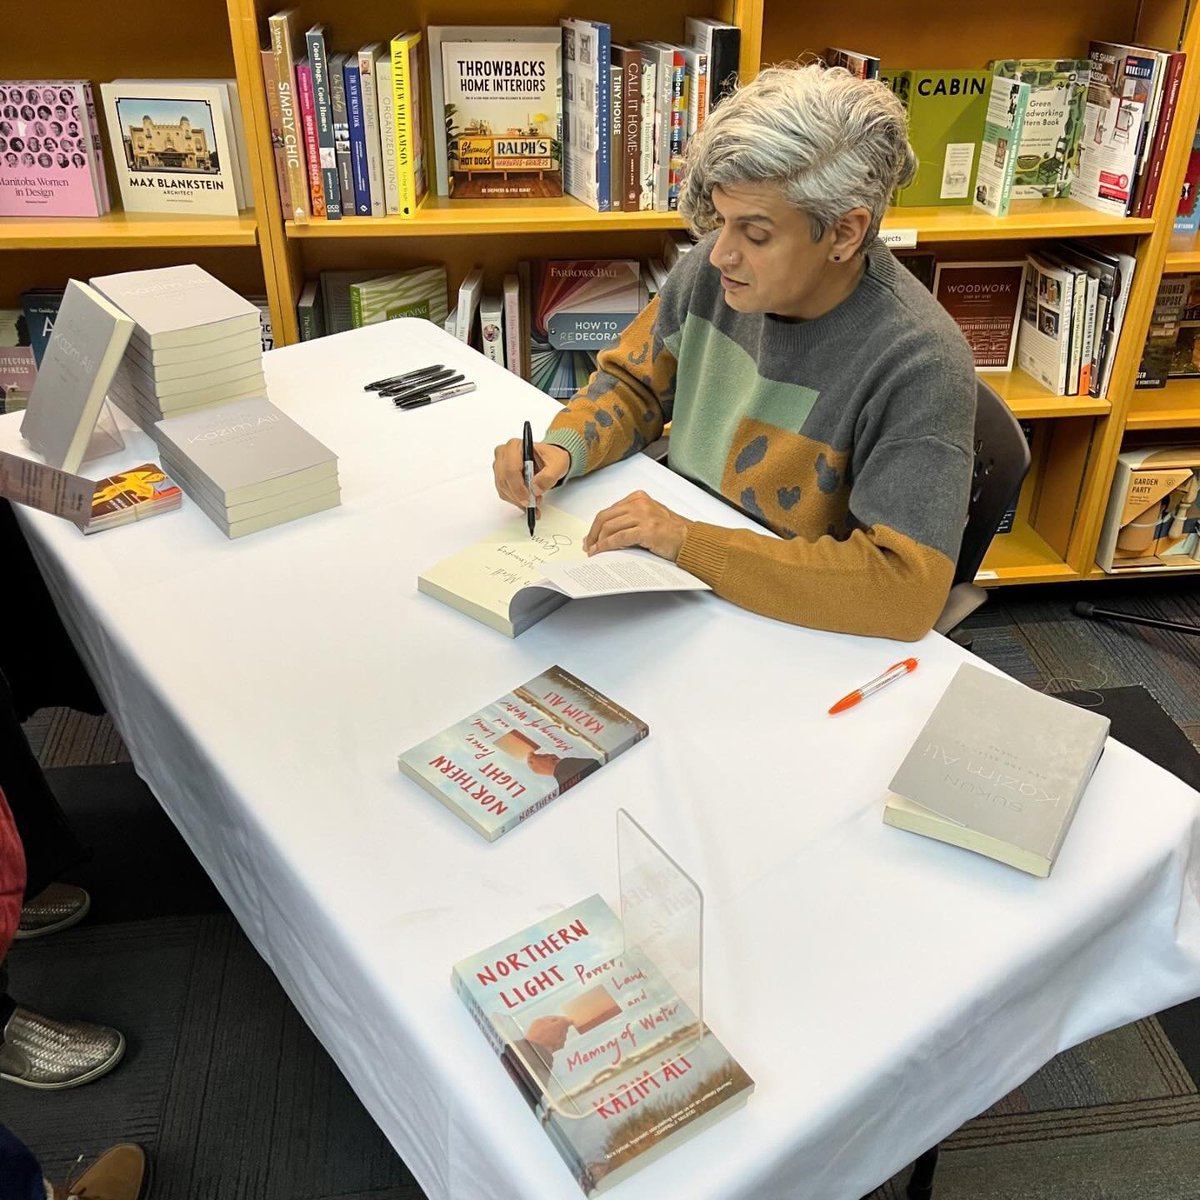 On Wed, Mar 13, we spent the night at McNally Robinson Booksellers for An Evening with Kazim Ali! Thank you @KazimAliPoet for sharing your new book SUKUN with us, host @JennyHeijun, co-presenter @mcnallyrobinson, publisher @goose_lane, and to the community for joining us!